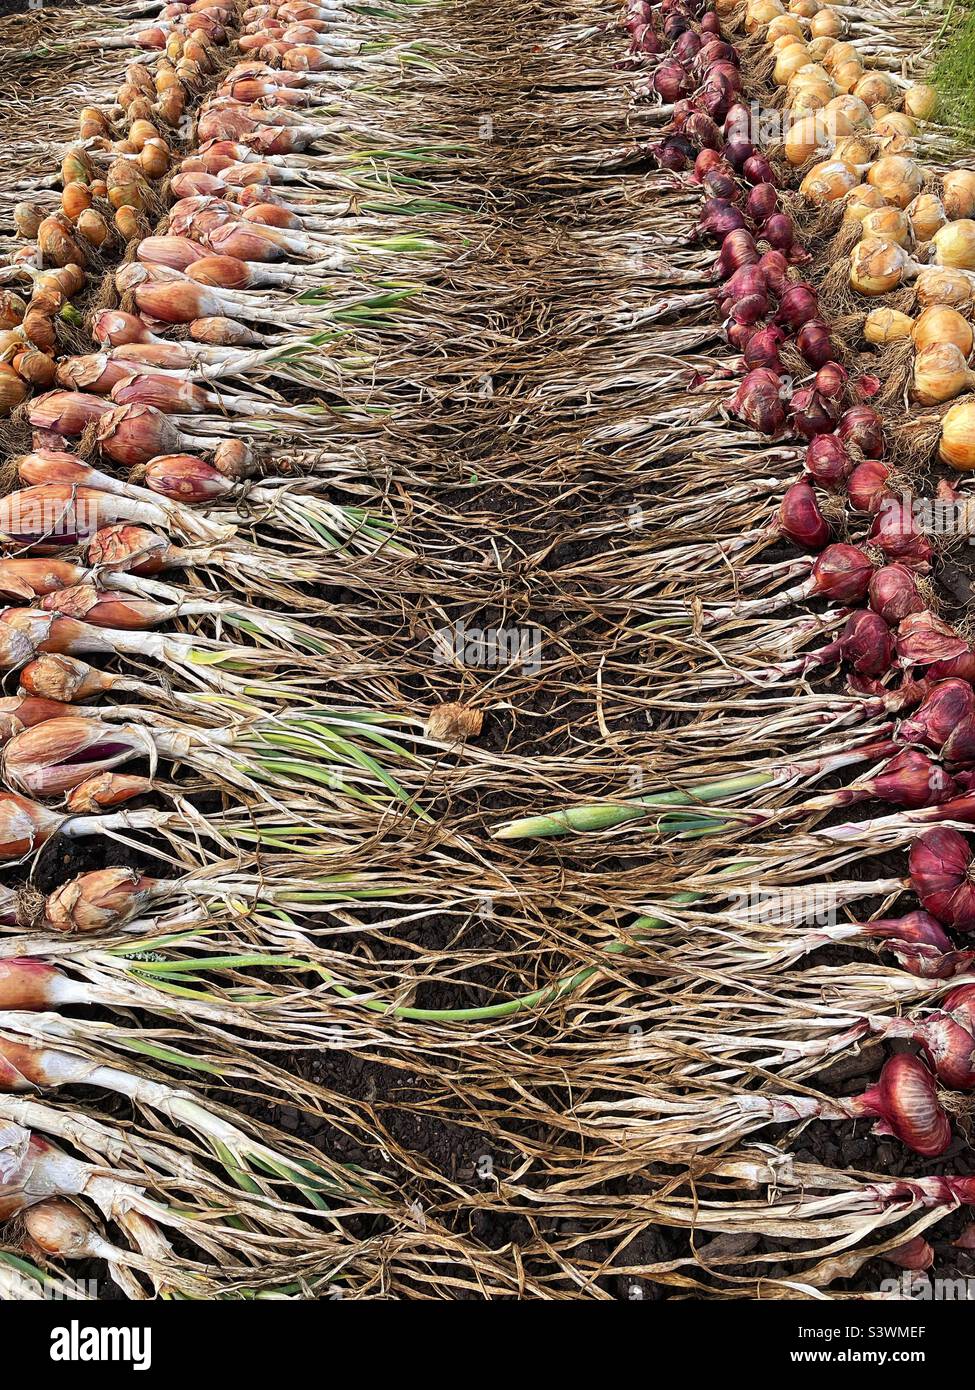 Rows of different onions laid out to dry after digging up, August. Stock Photo